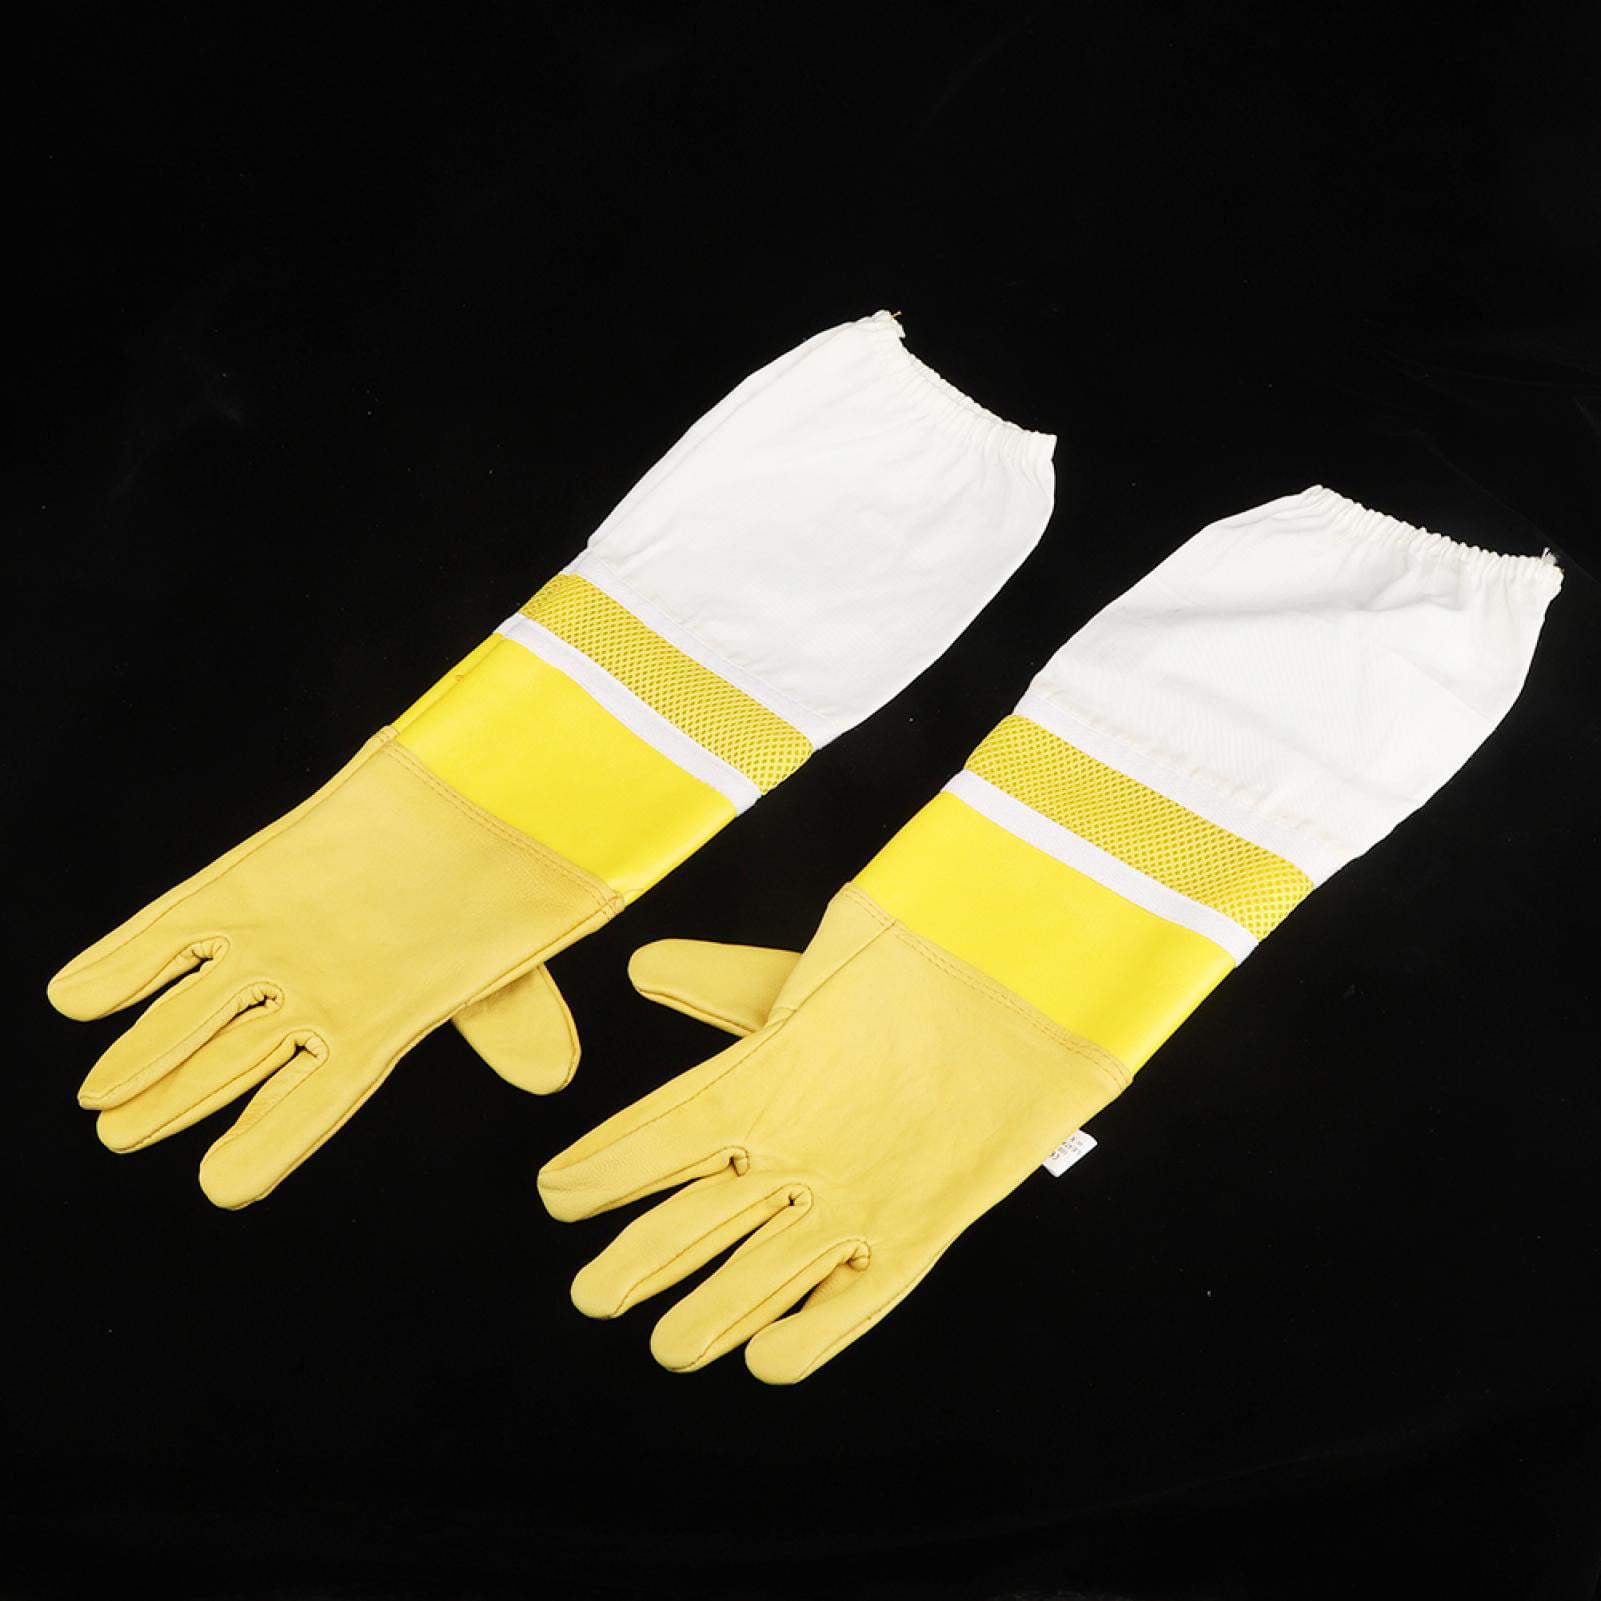 Details about   Beekeeping Protective Gloves with Vented Long Sleeves-Yellow White 1 Pair 